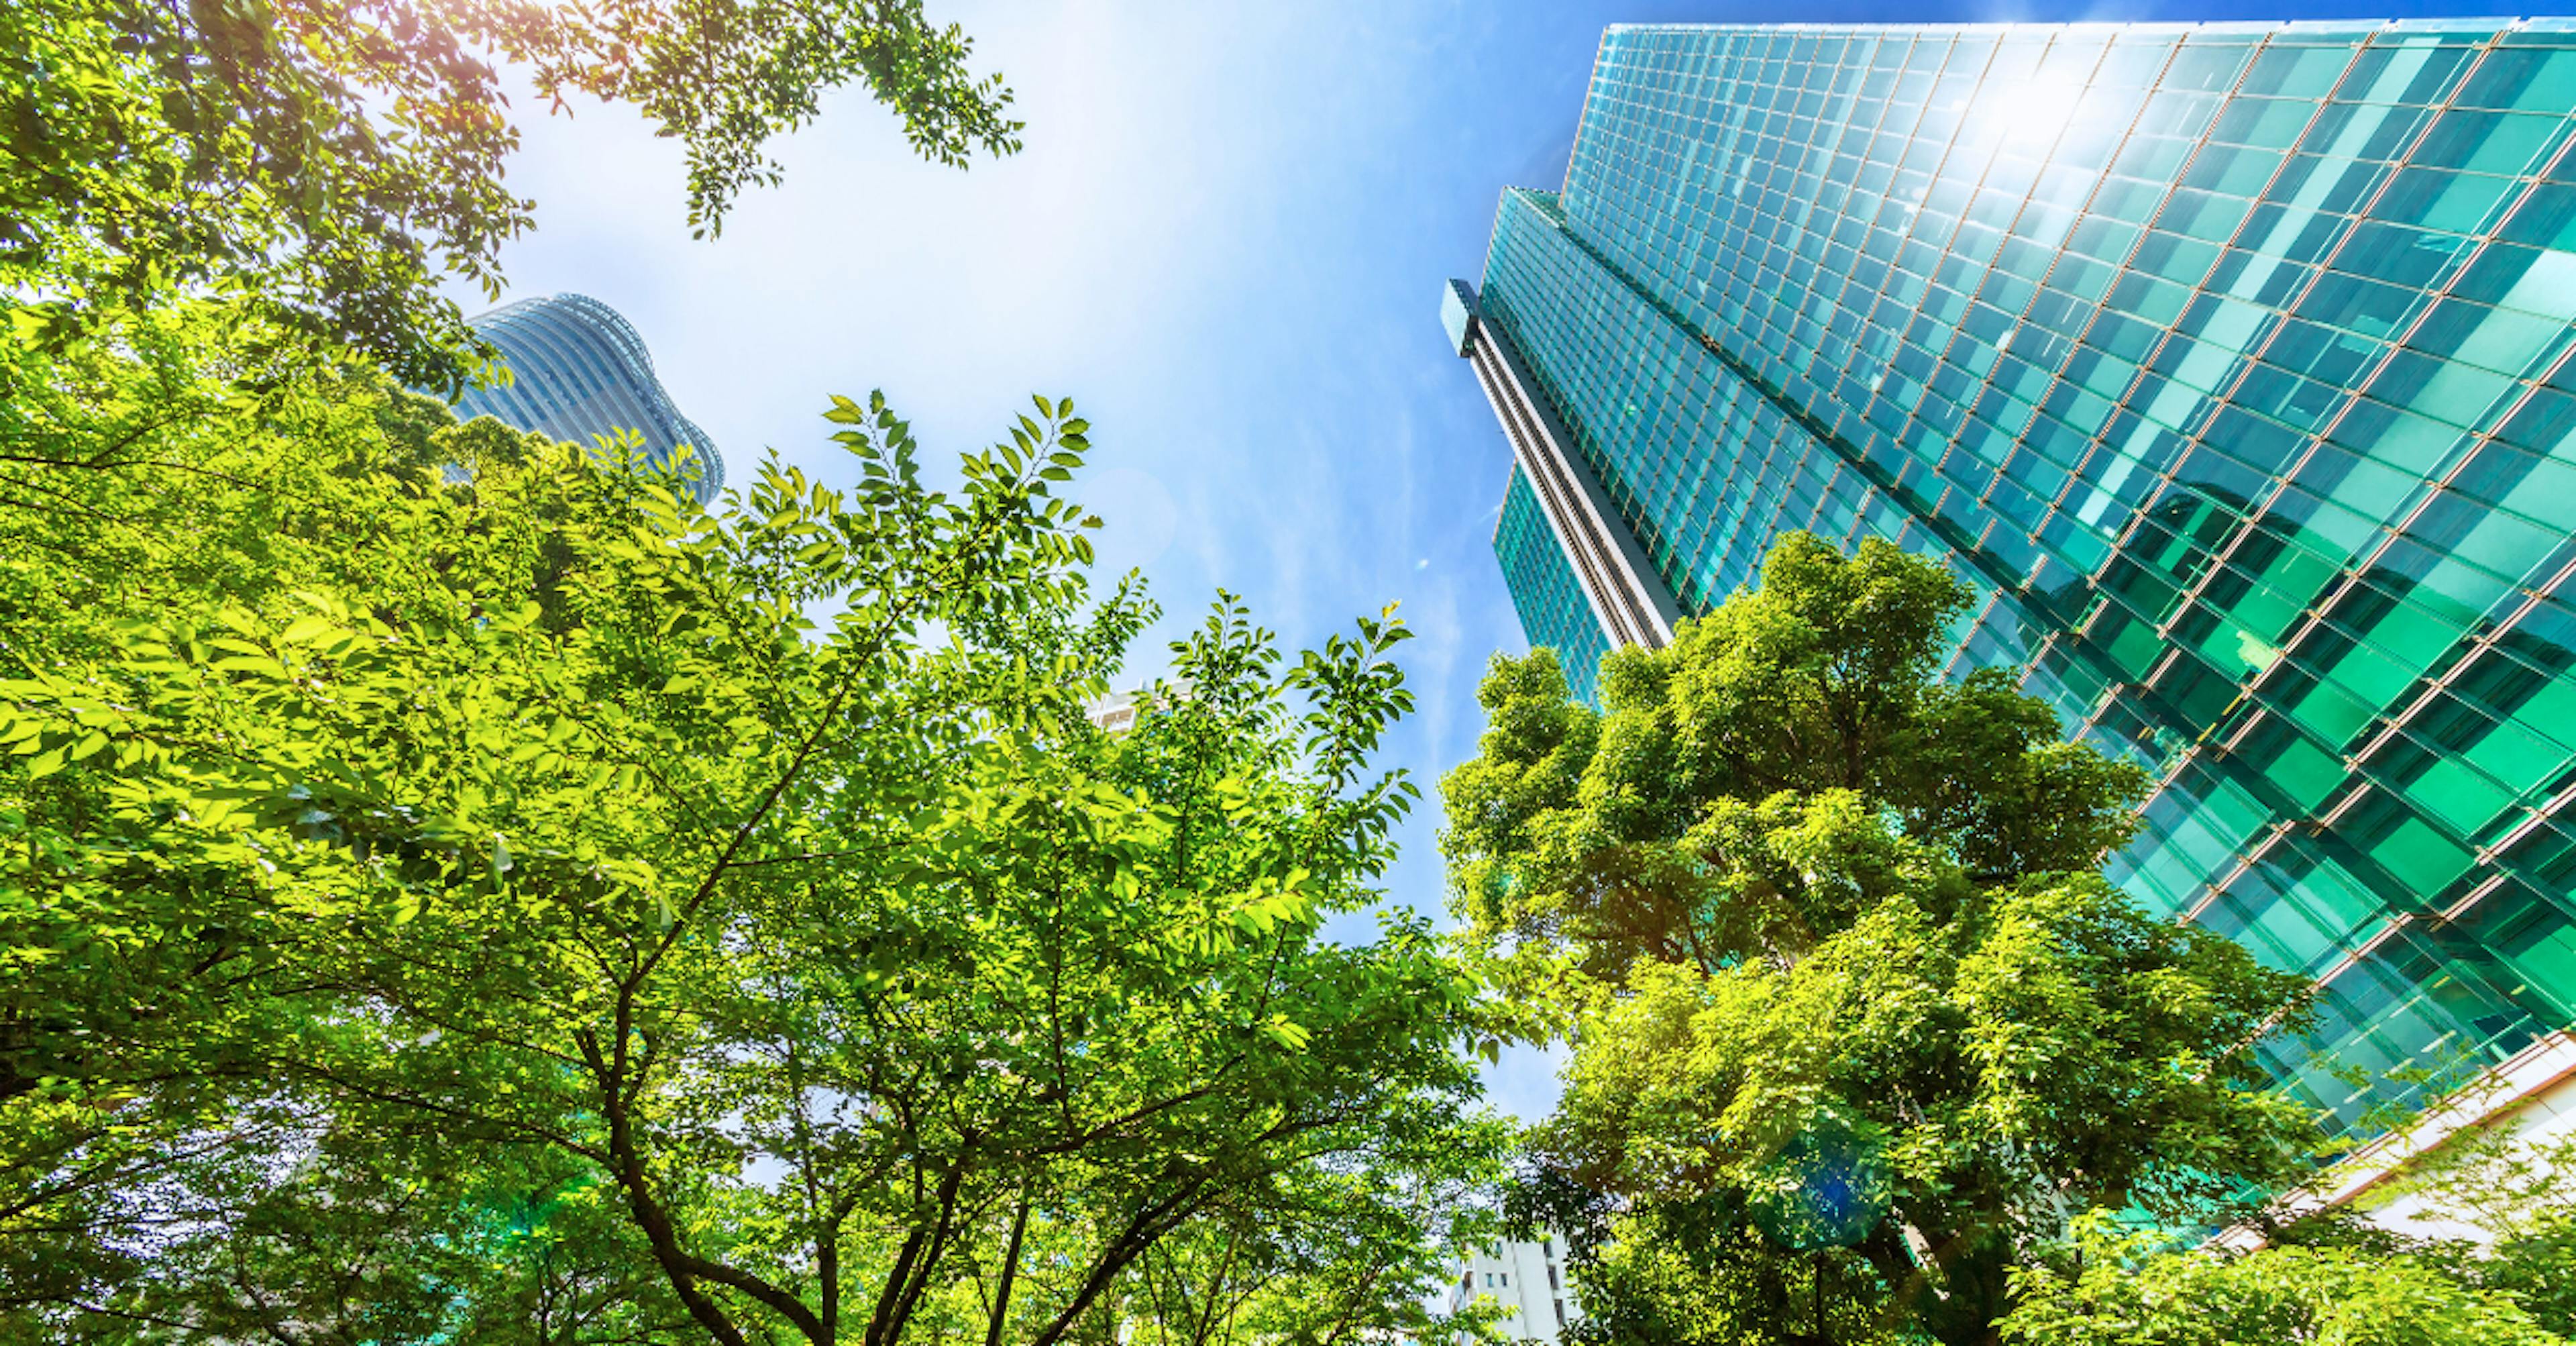 Urban forests are bringing back the critical green touch to metropolitan landscapes.